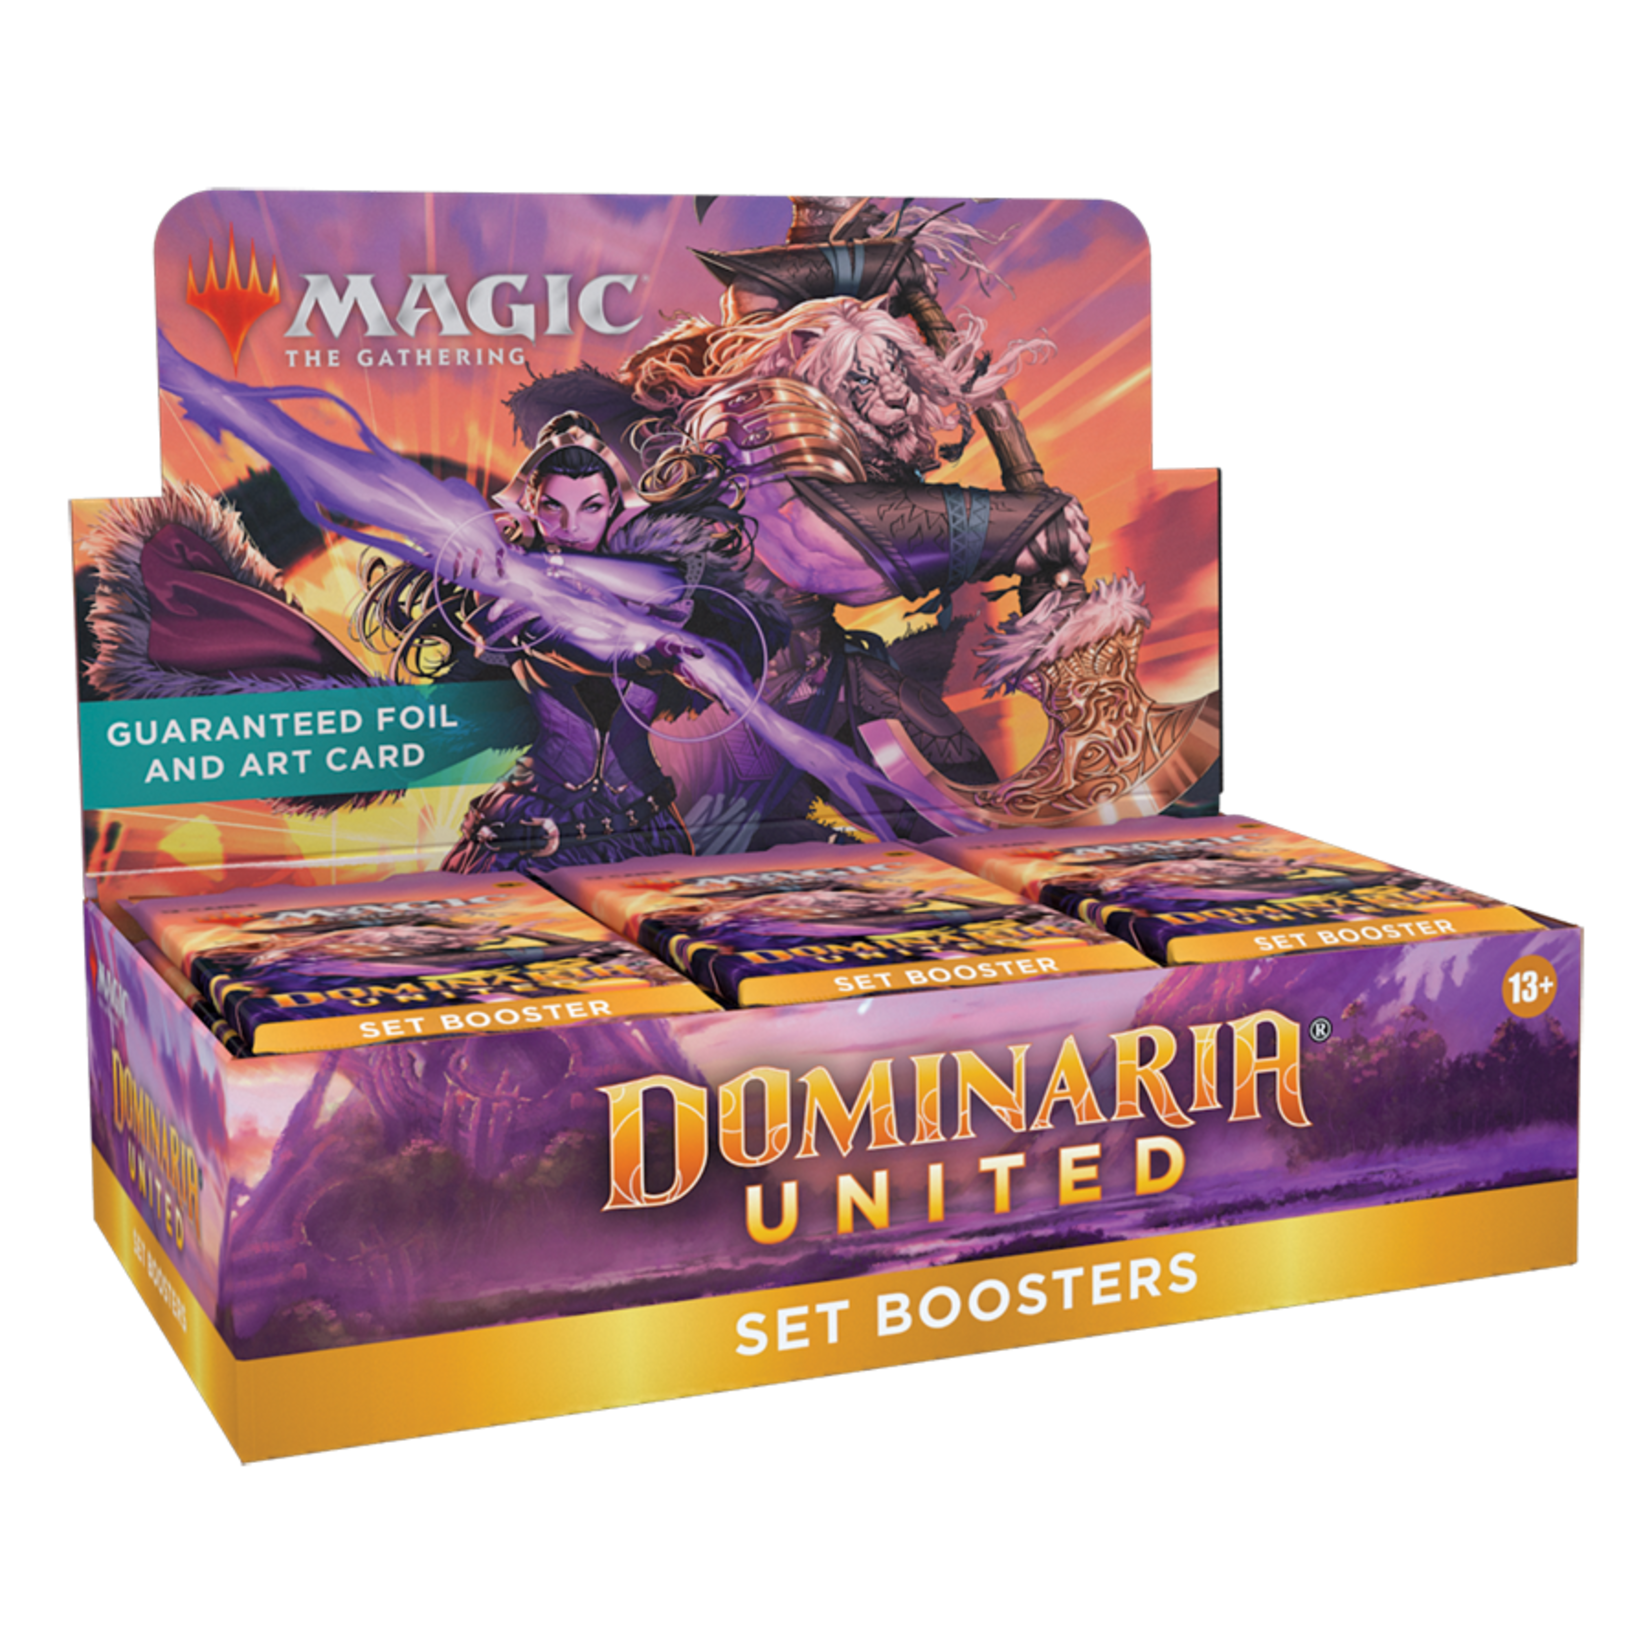 Wizards of the Coast Dominaria United: Set Booster Box